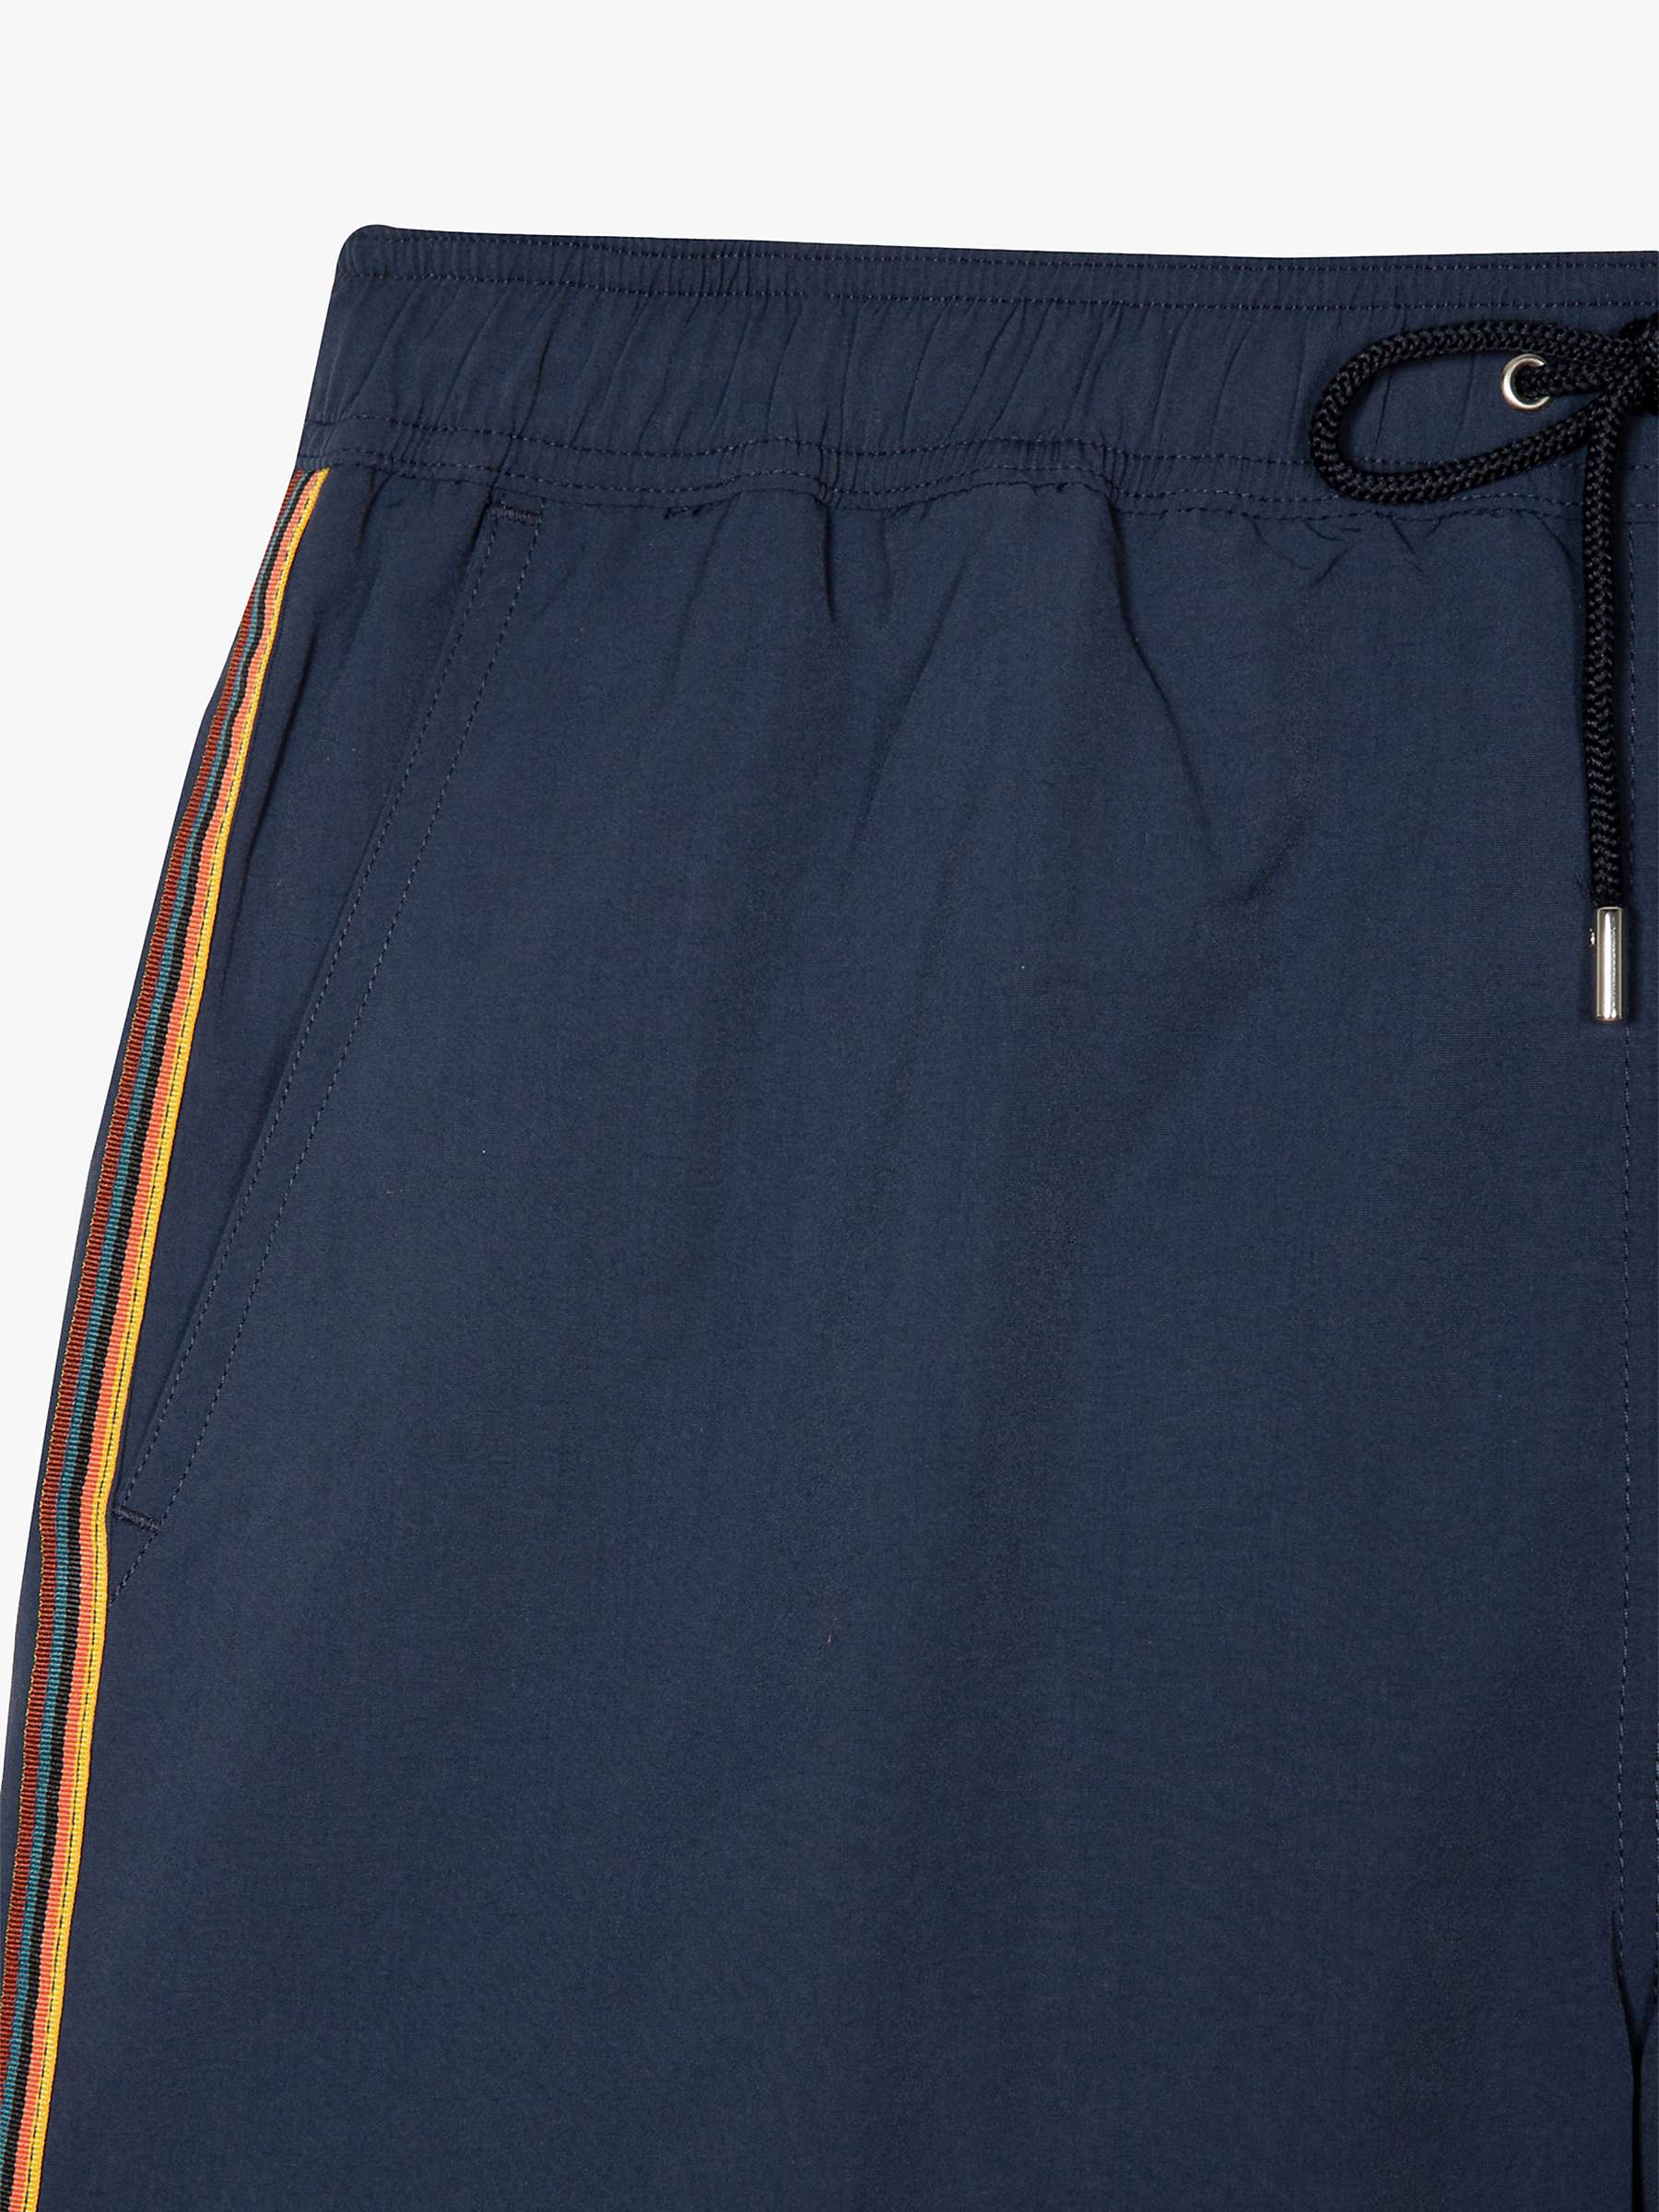 Buy PS Paul Smith Swim Shorts Online at johnlewis.com